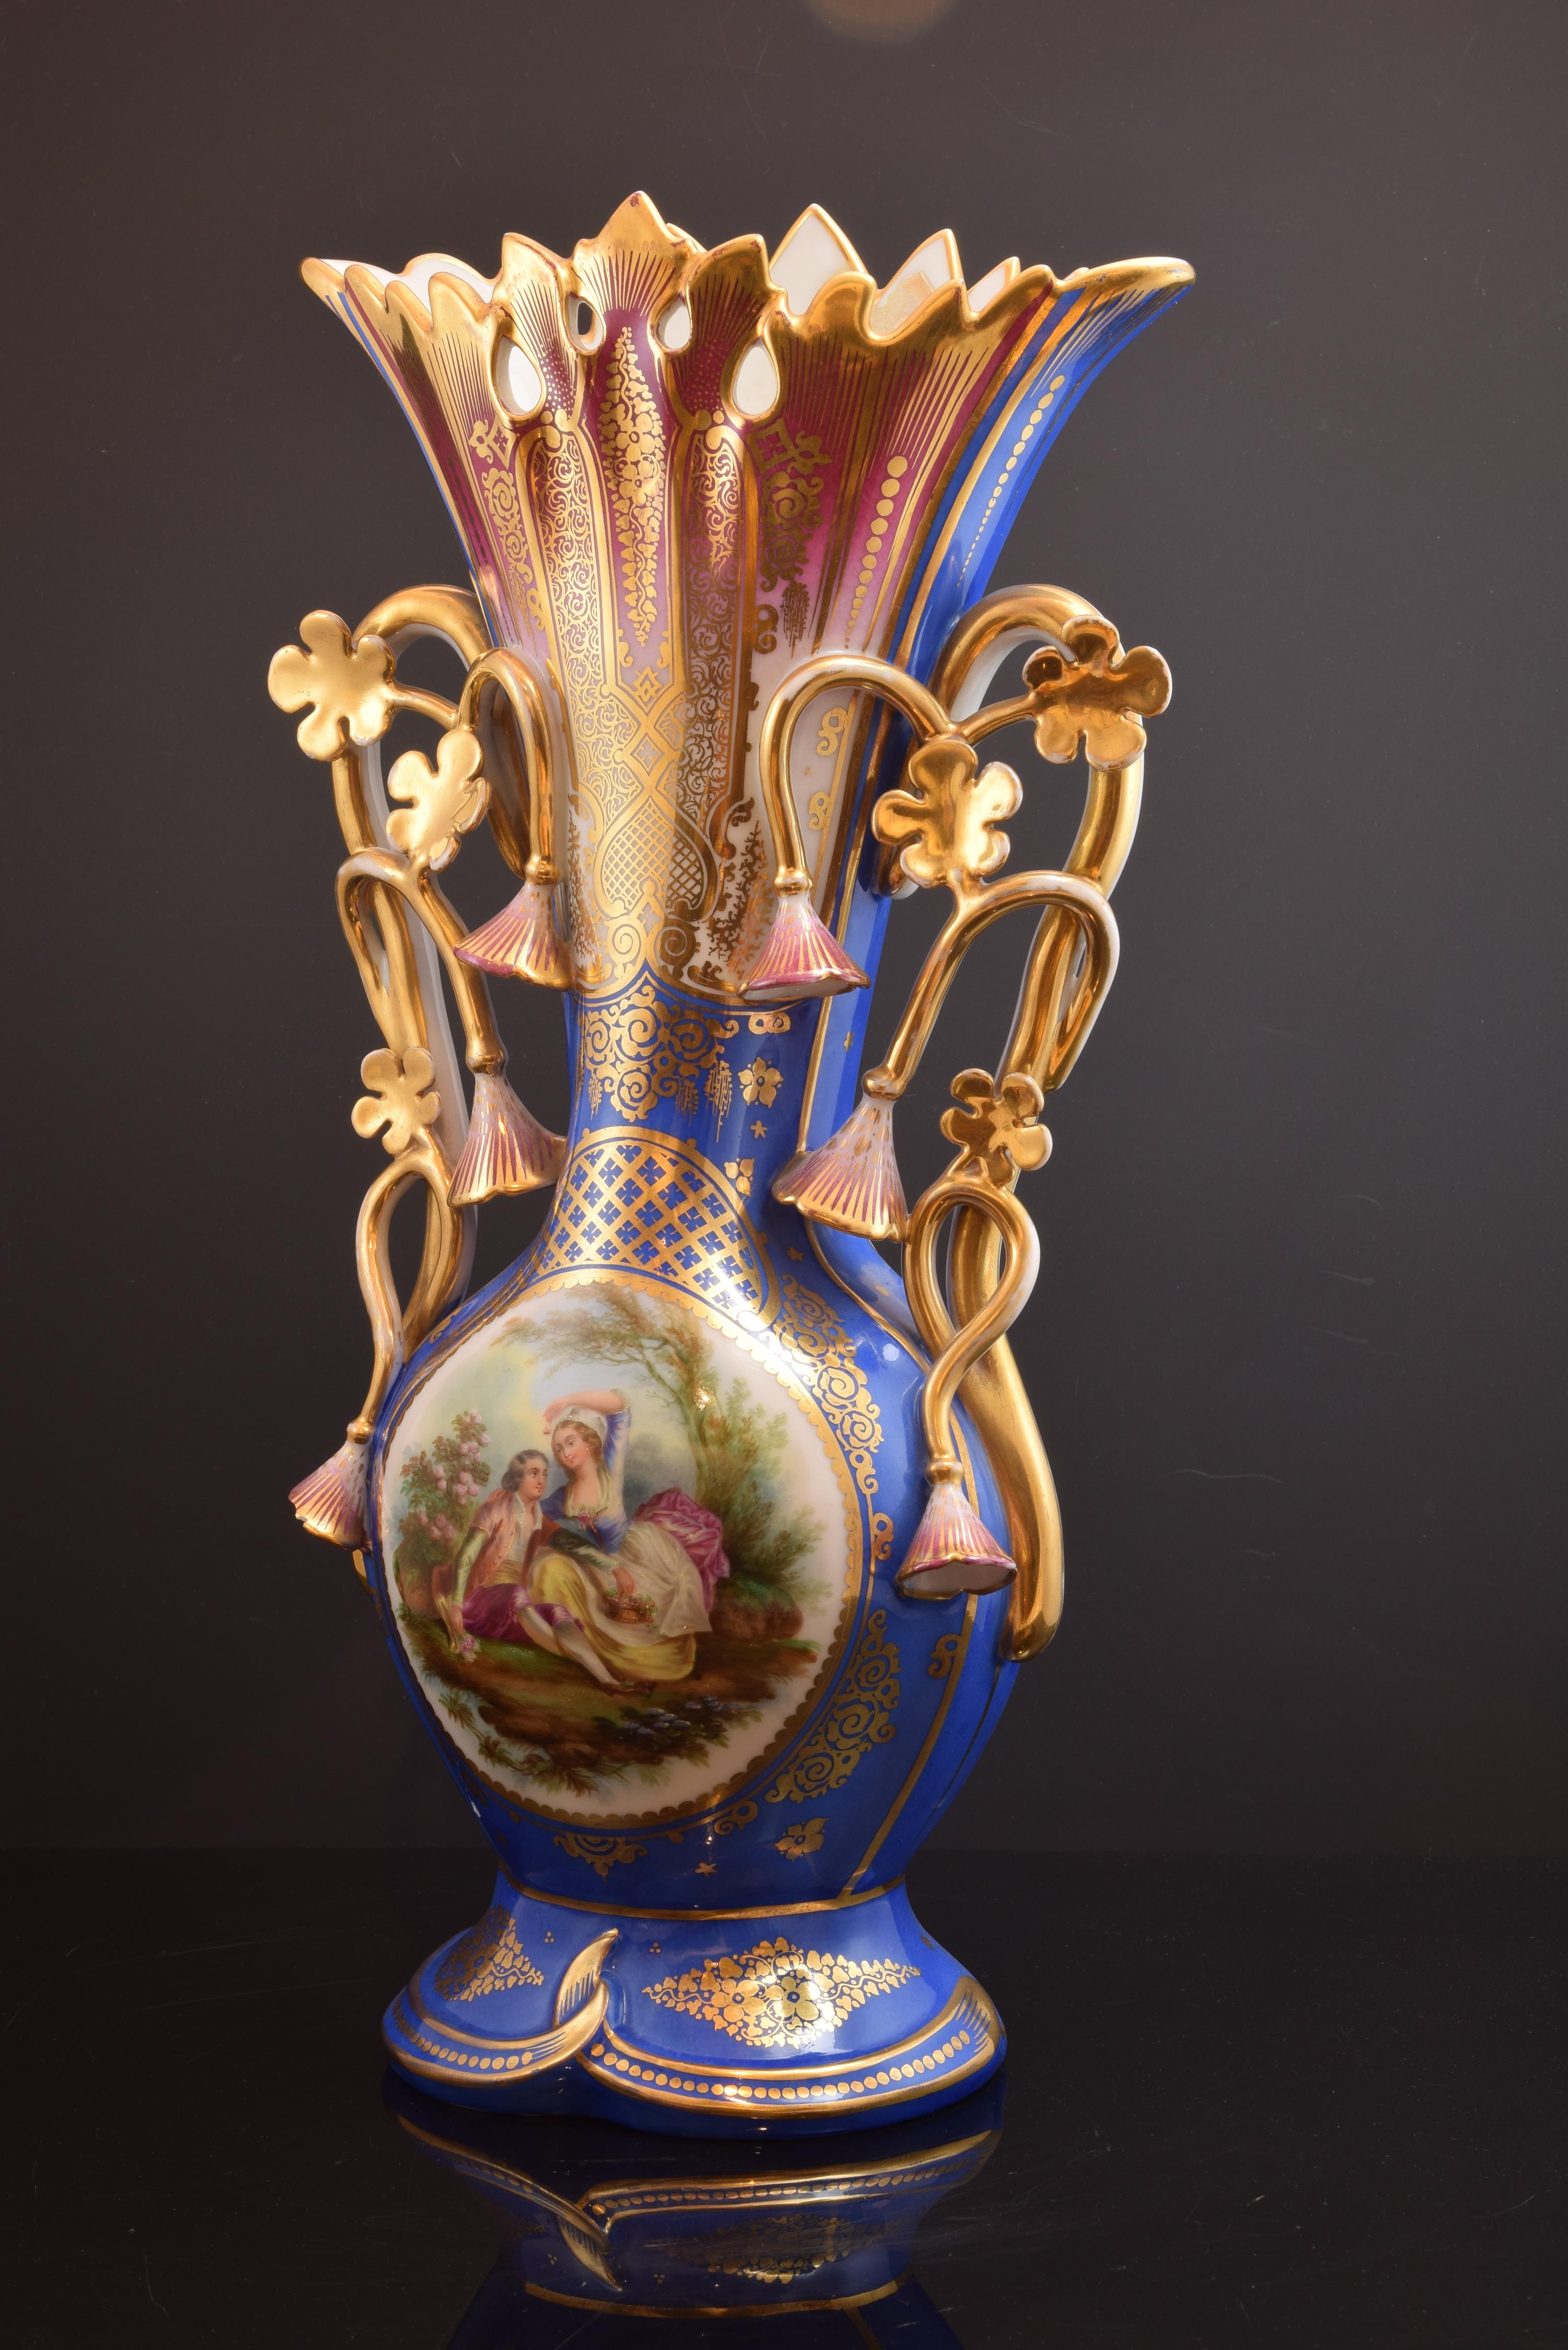 Porcelain base, 19th-20th century.
Circular body vase made of enameled porcelain with a bucolic scene on the front, starring a couple, and surrounded by different elements in gold on blue, as was usual in certain European porcelain of the